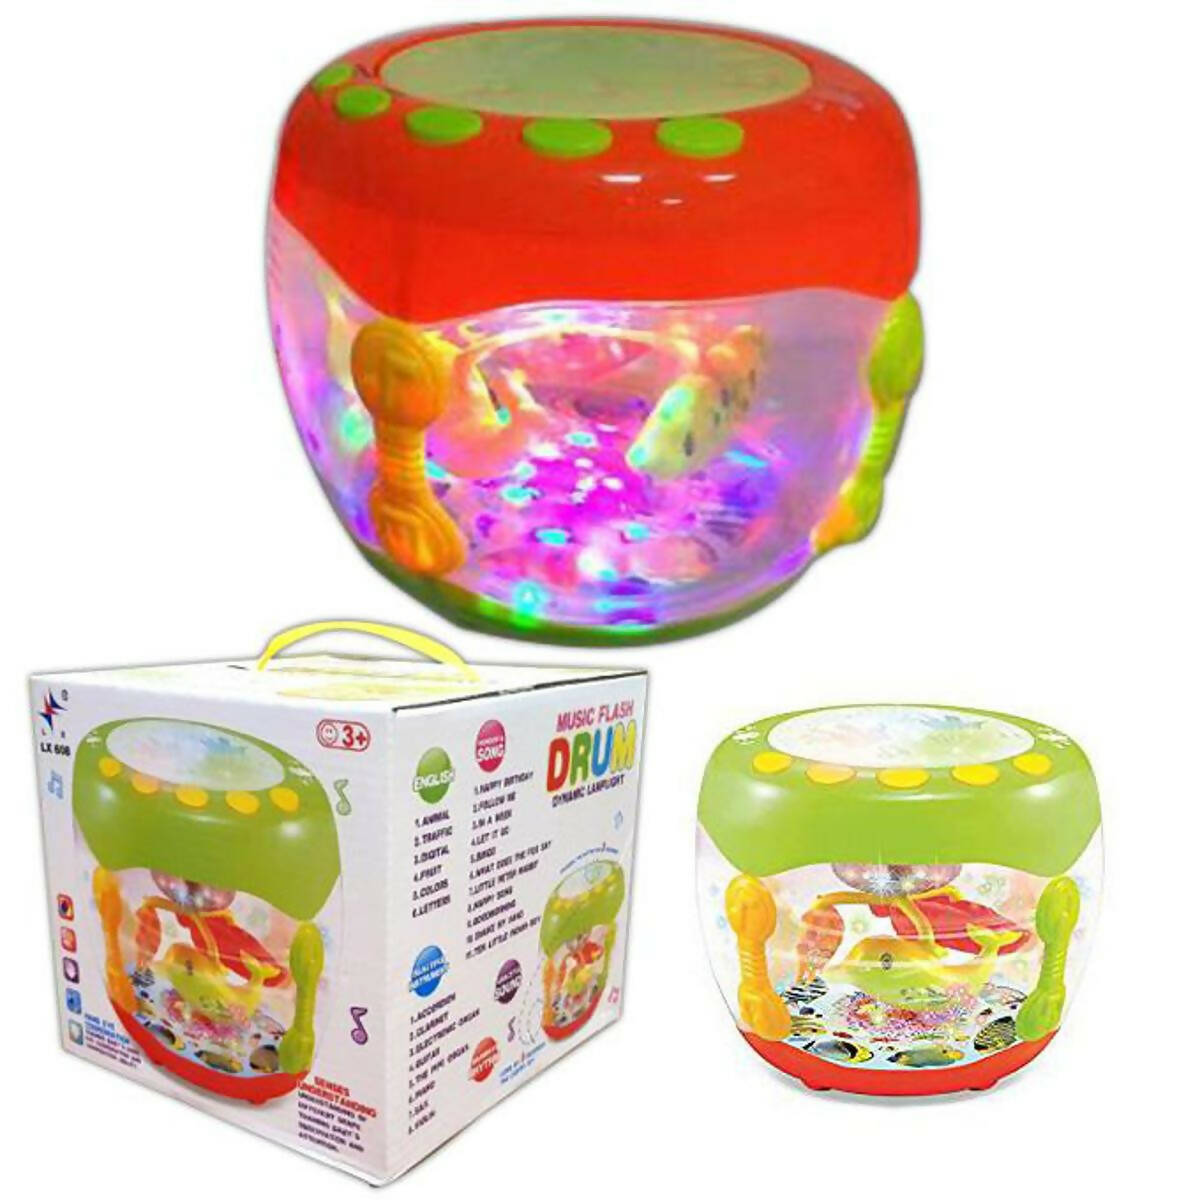 Big Musical Flash Drum with Lights and Nursery Rhymes